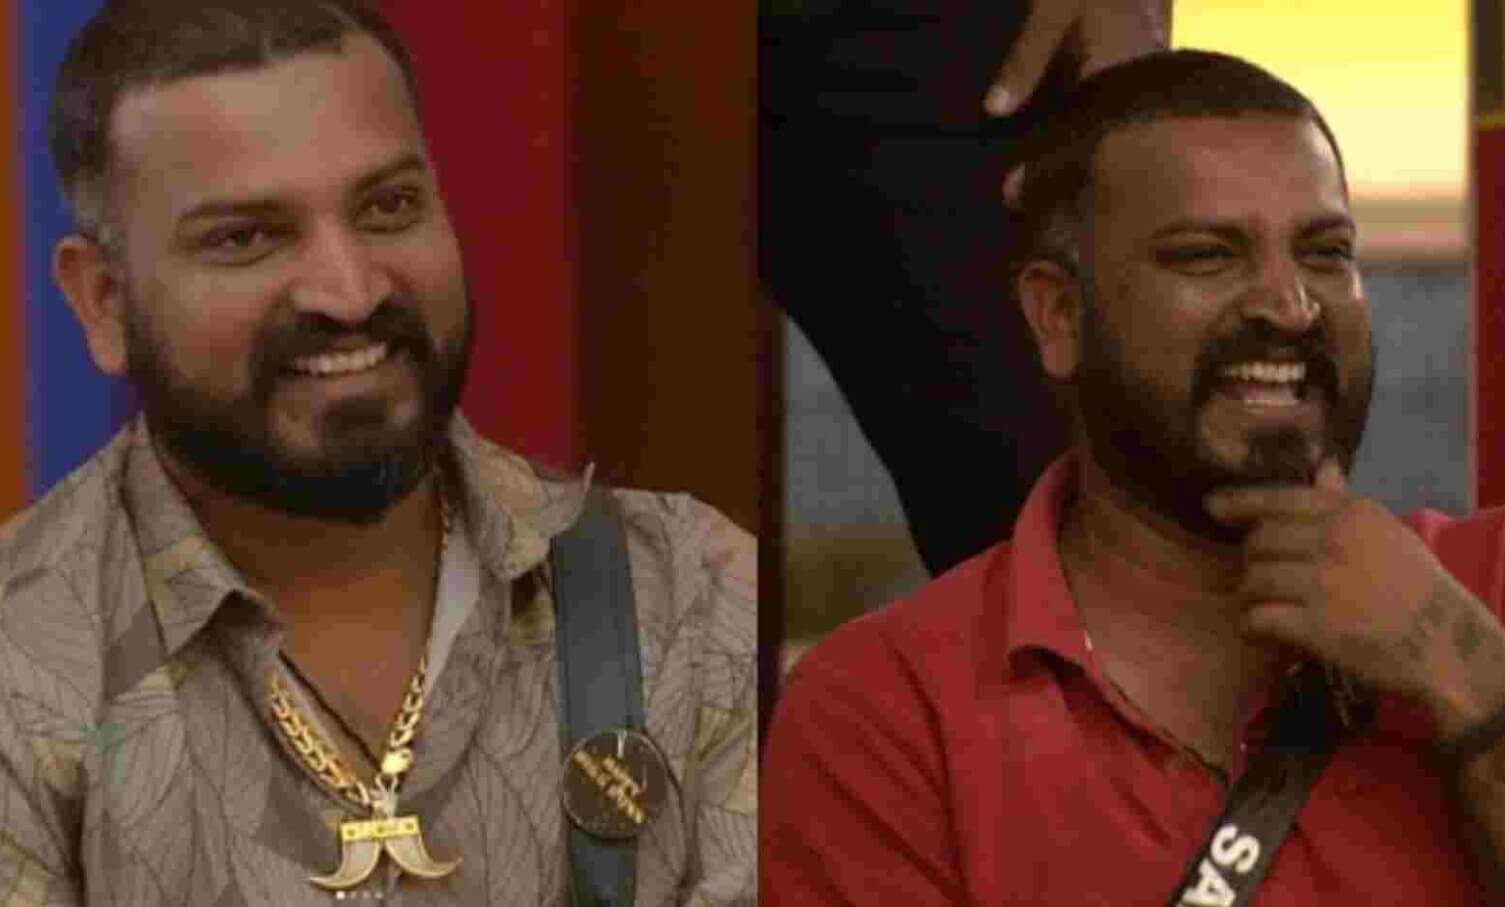 Bigg Boss Kannada contestant Santhosh Varthur tiger claw pendant, authorities seek fsl to find source of tiger 